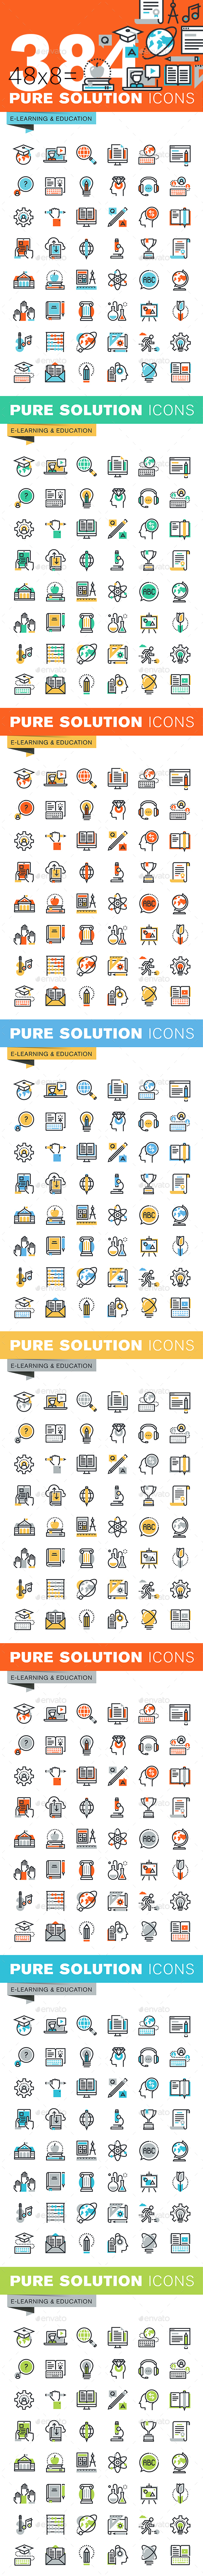 Set of Thin Line Flat Design Icons of Education